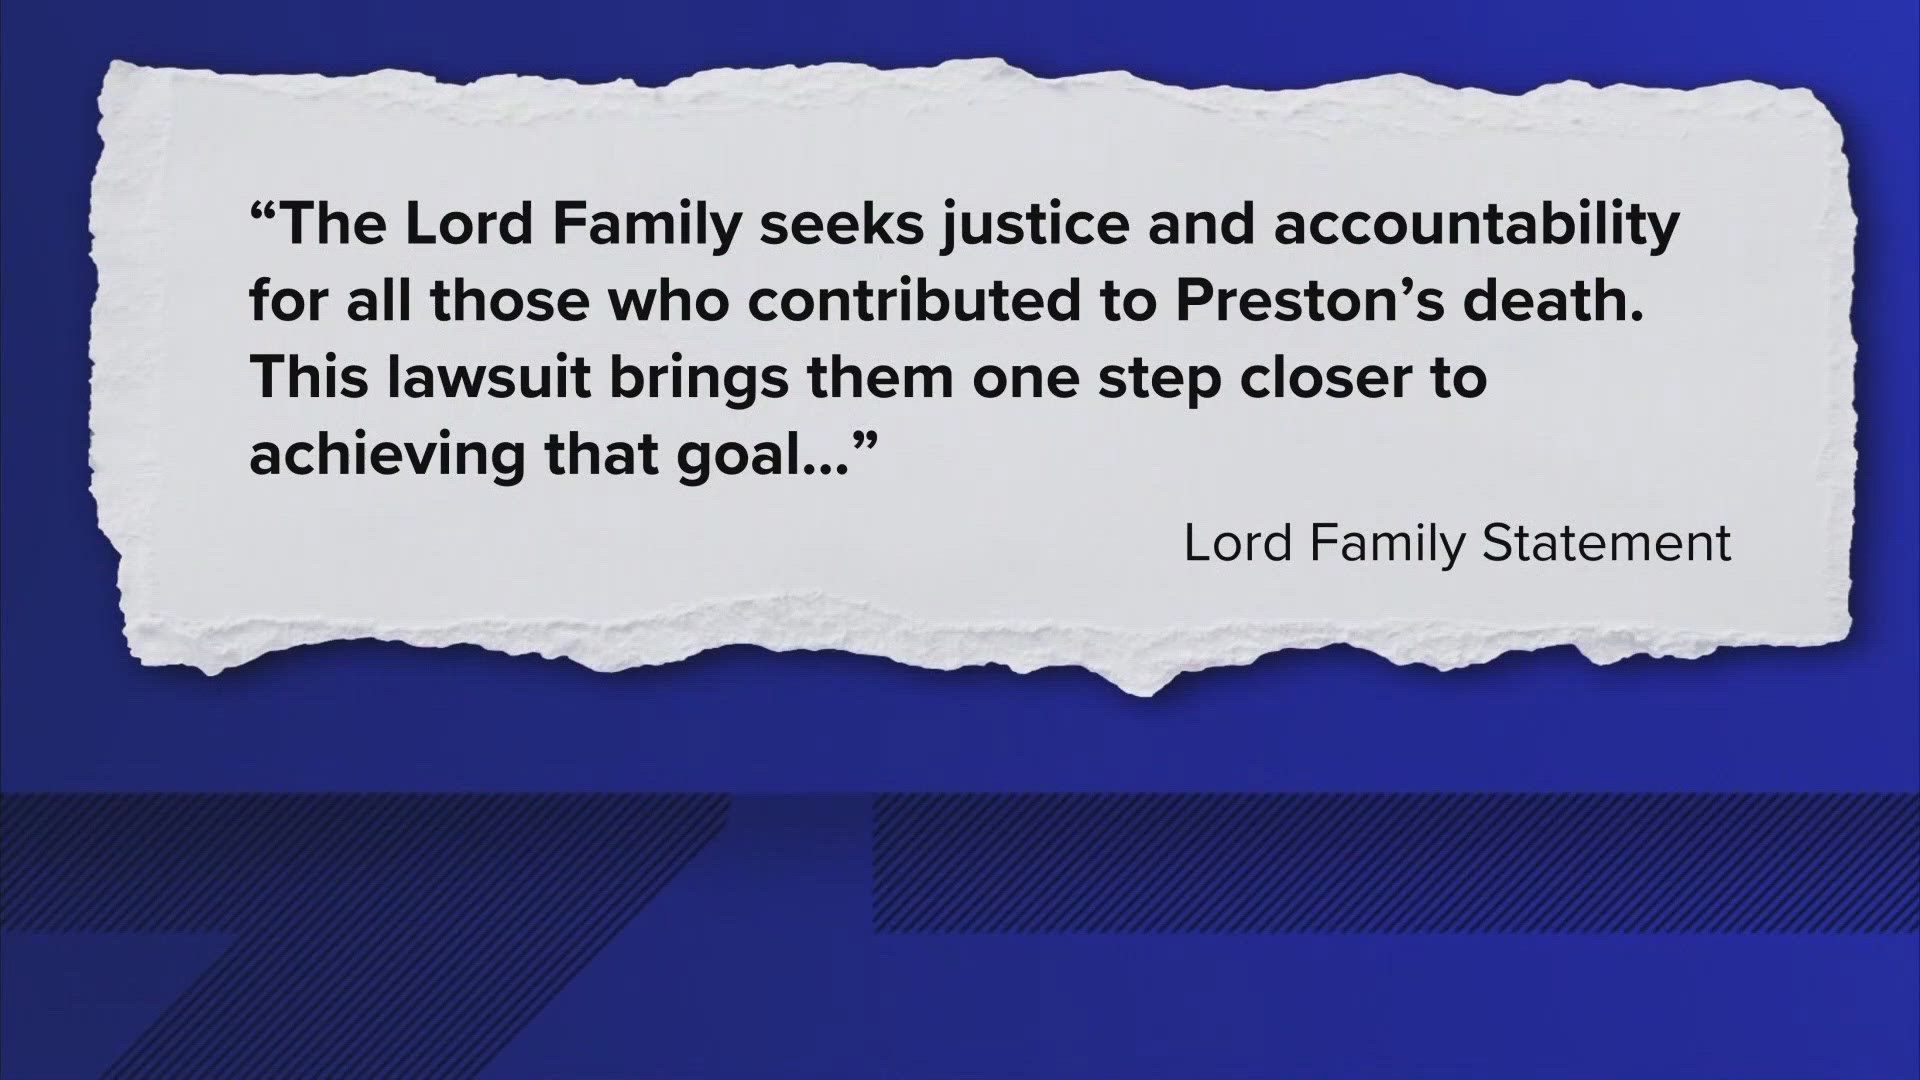 Preston Lord’s parents have filed a lawsuit after their son was assaulted and killed at a Halloween party last year.